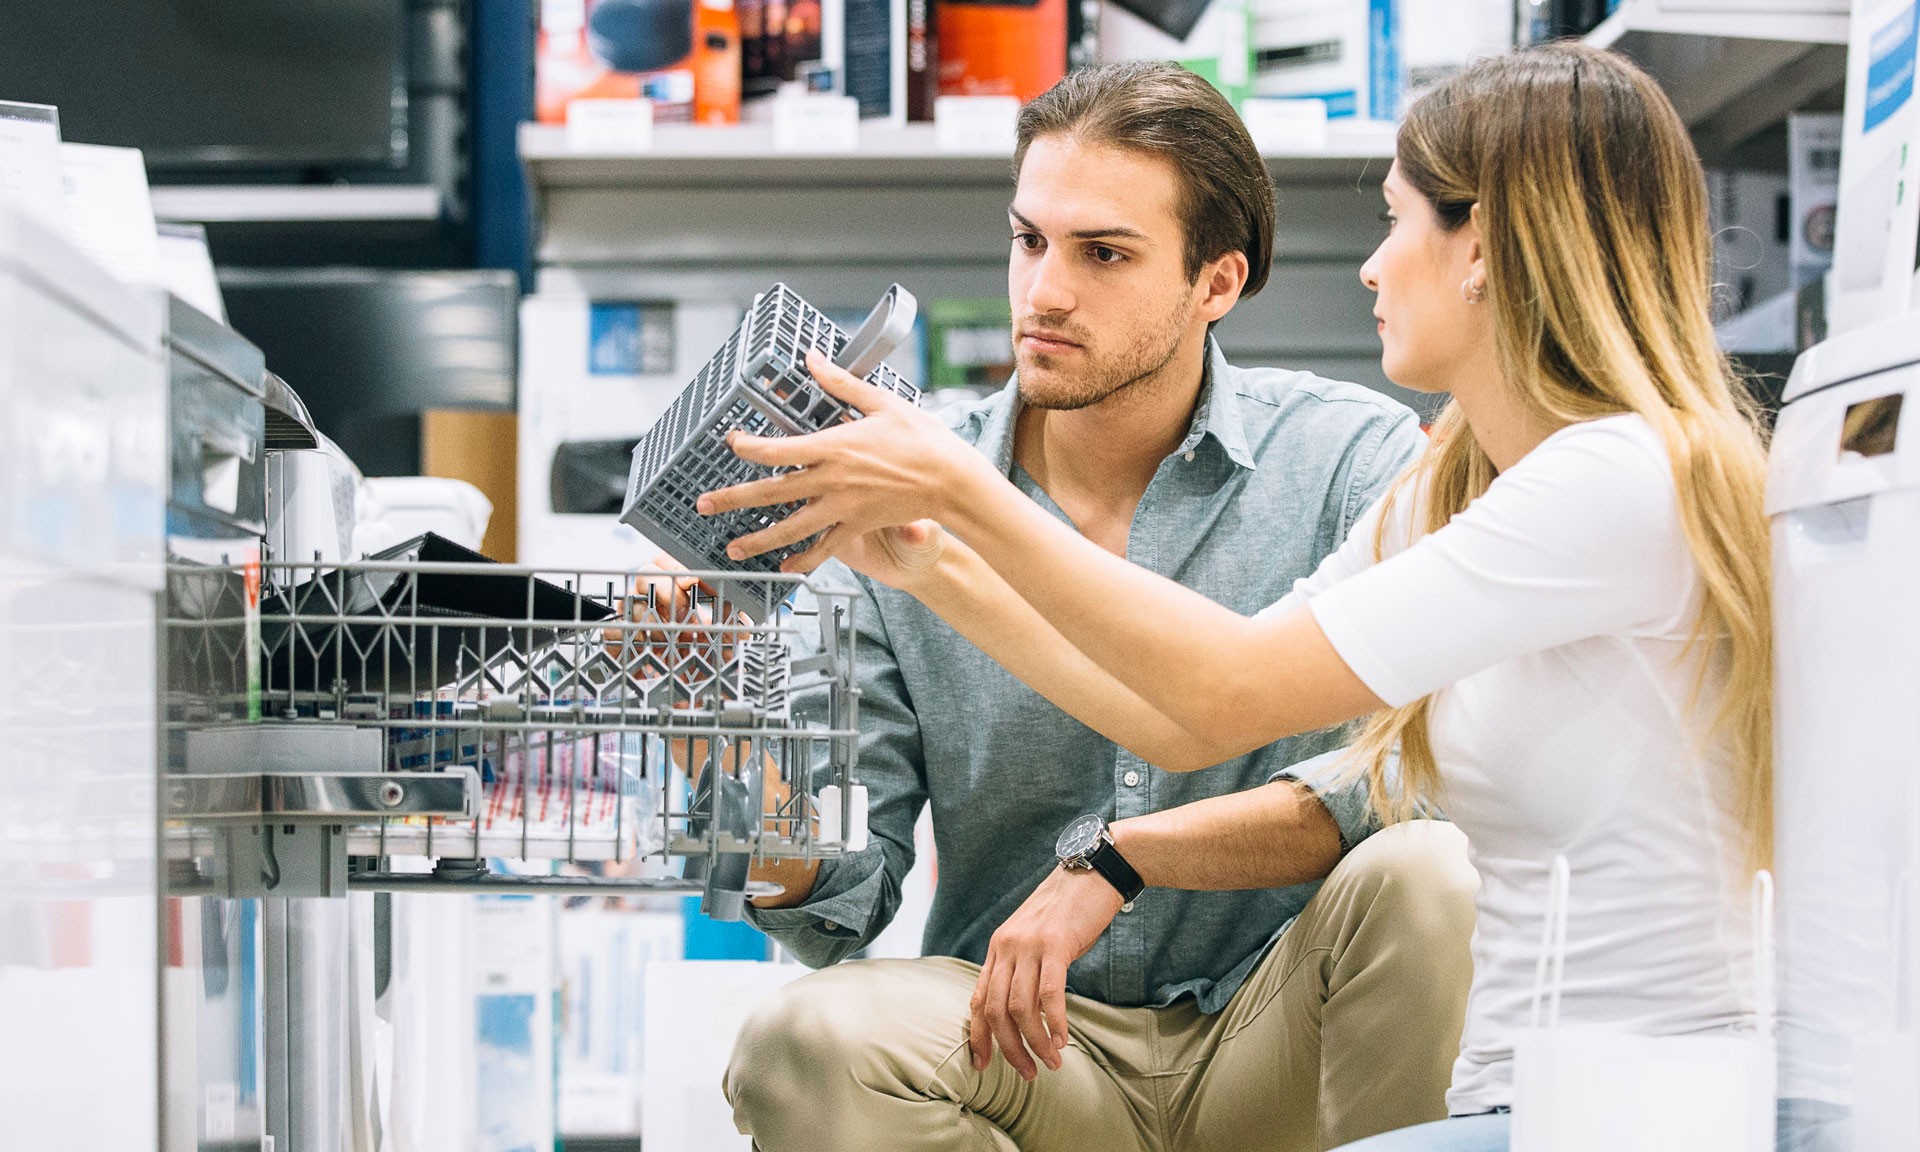 Essentials to Think About While Buying a New Dishwasher